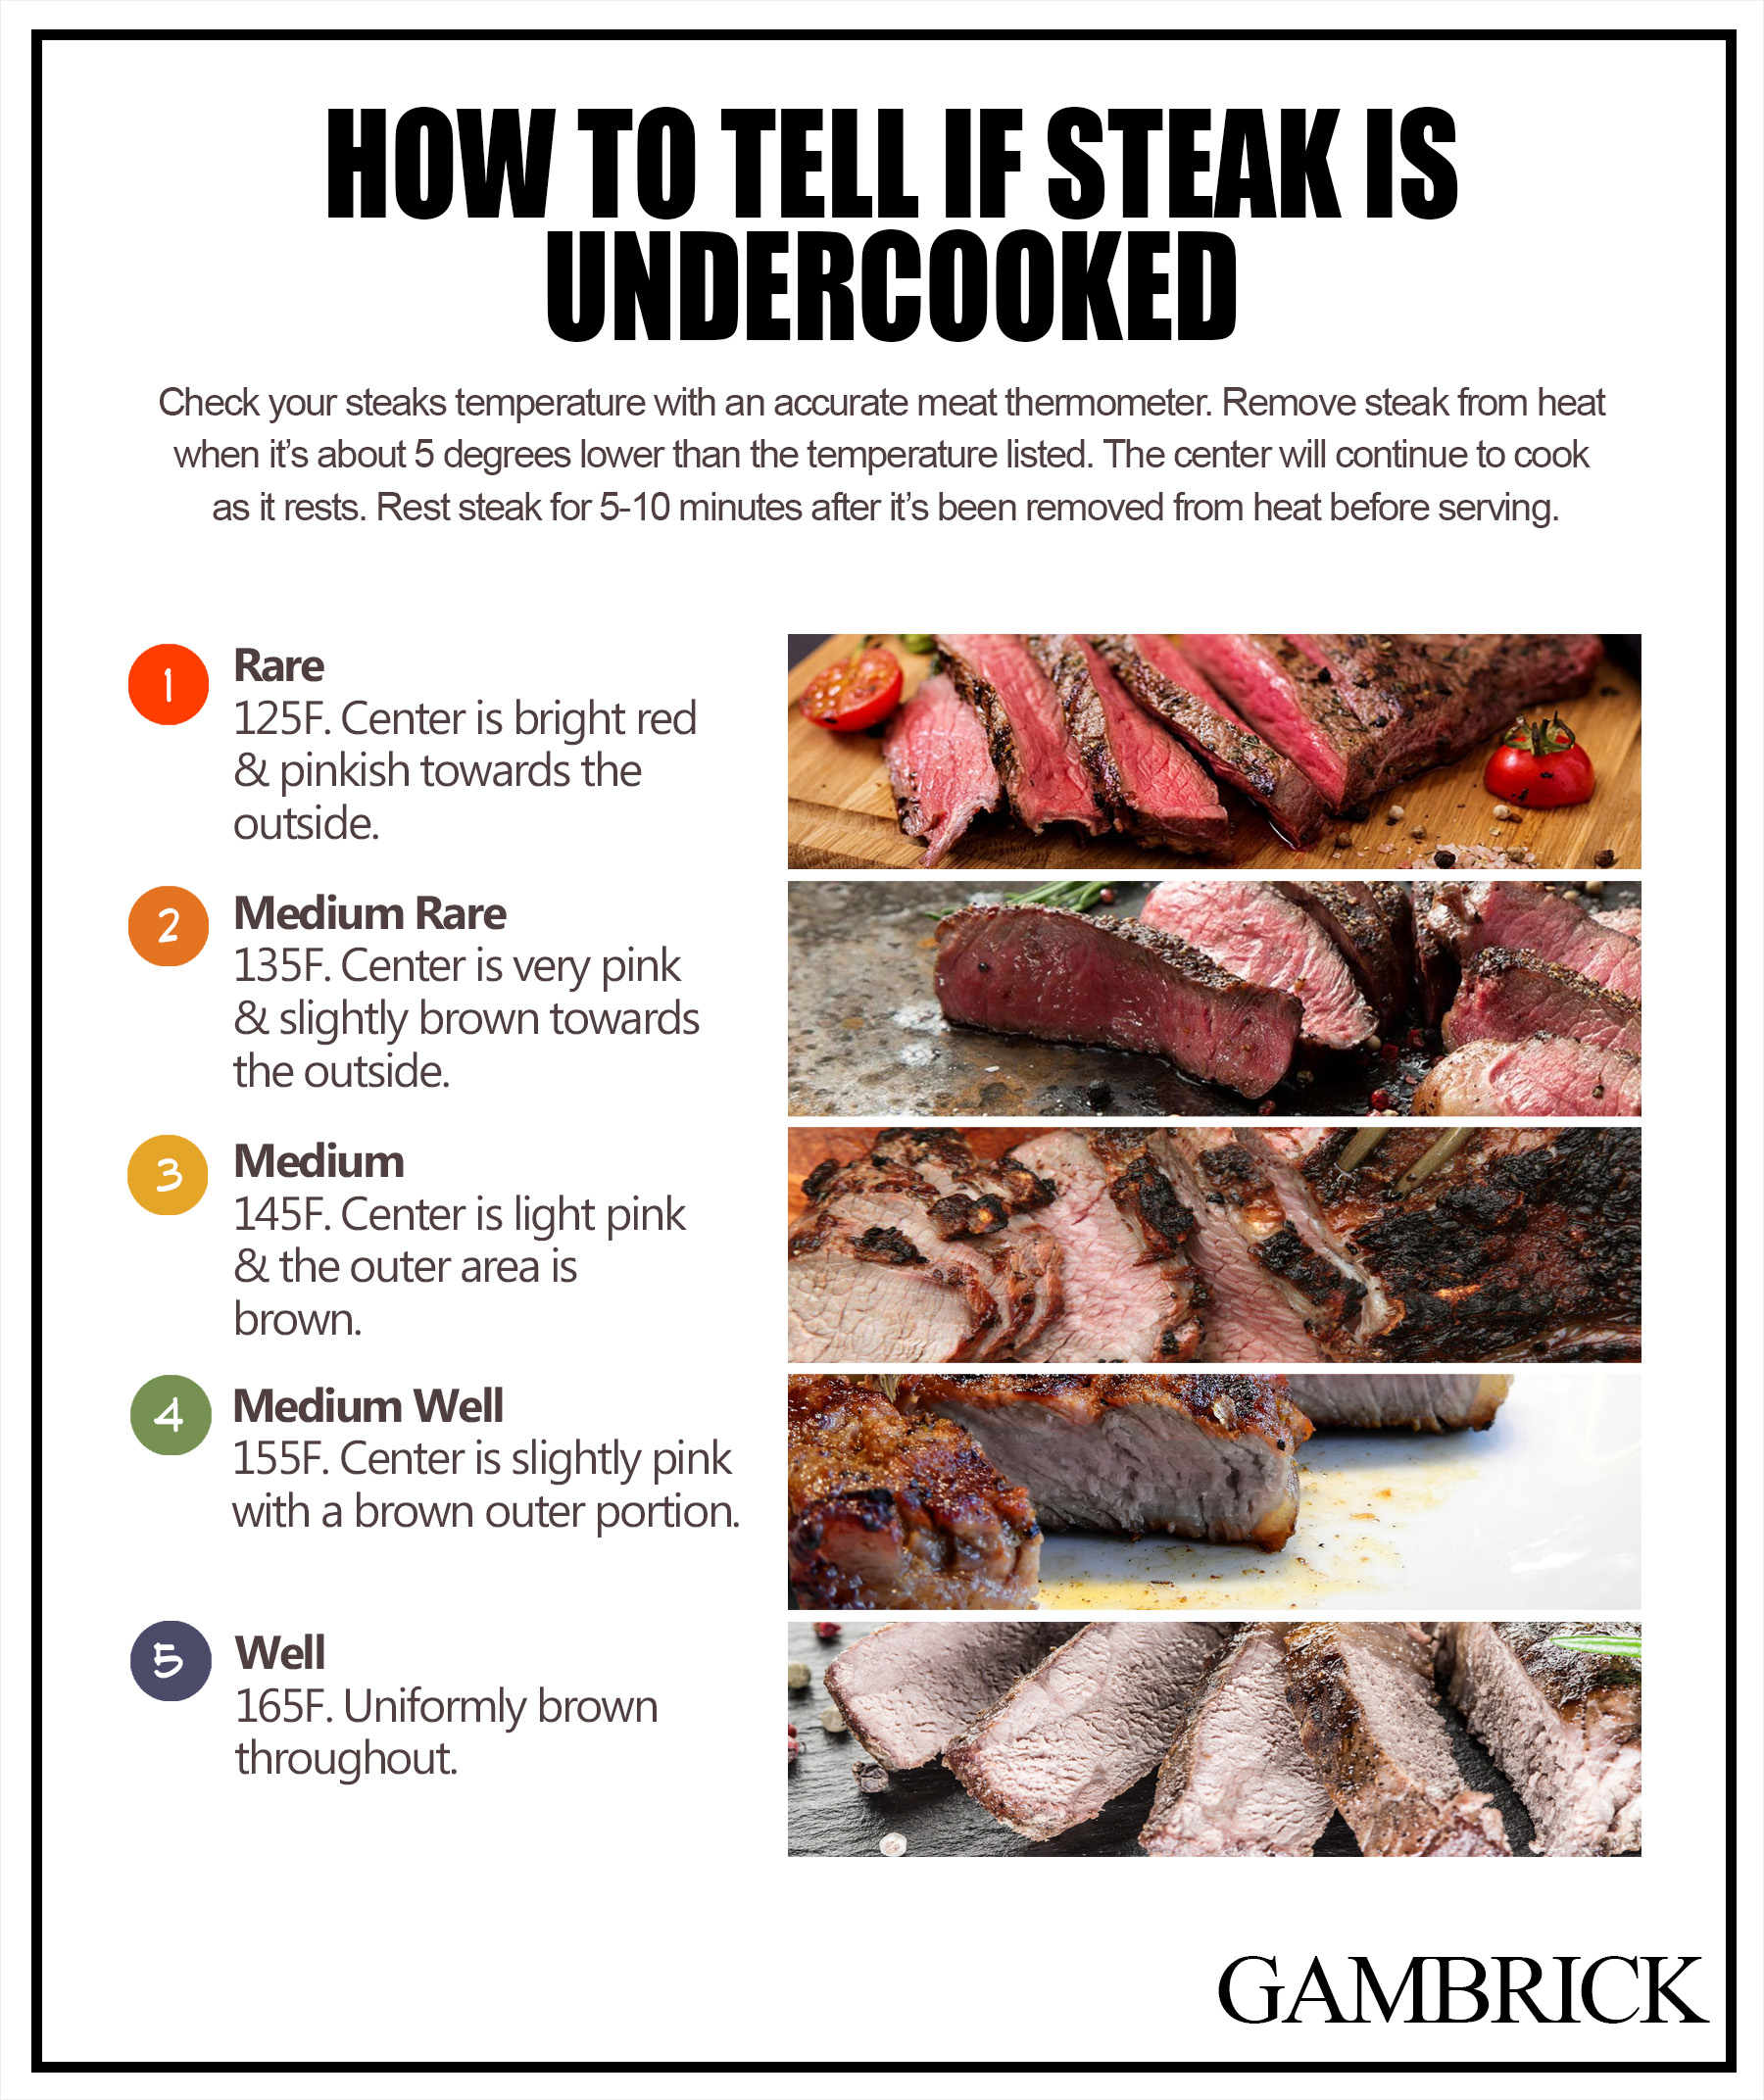 how to tell if steak is undercooked infographic chart 1